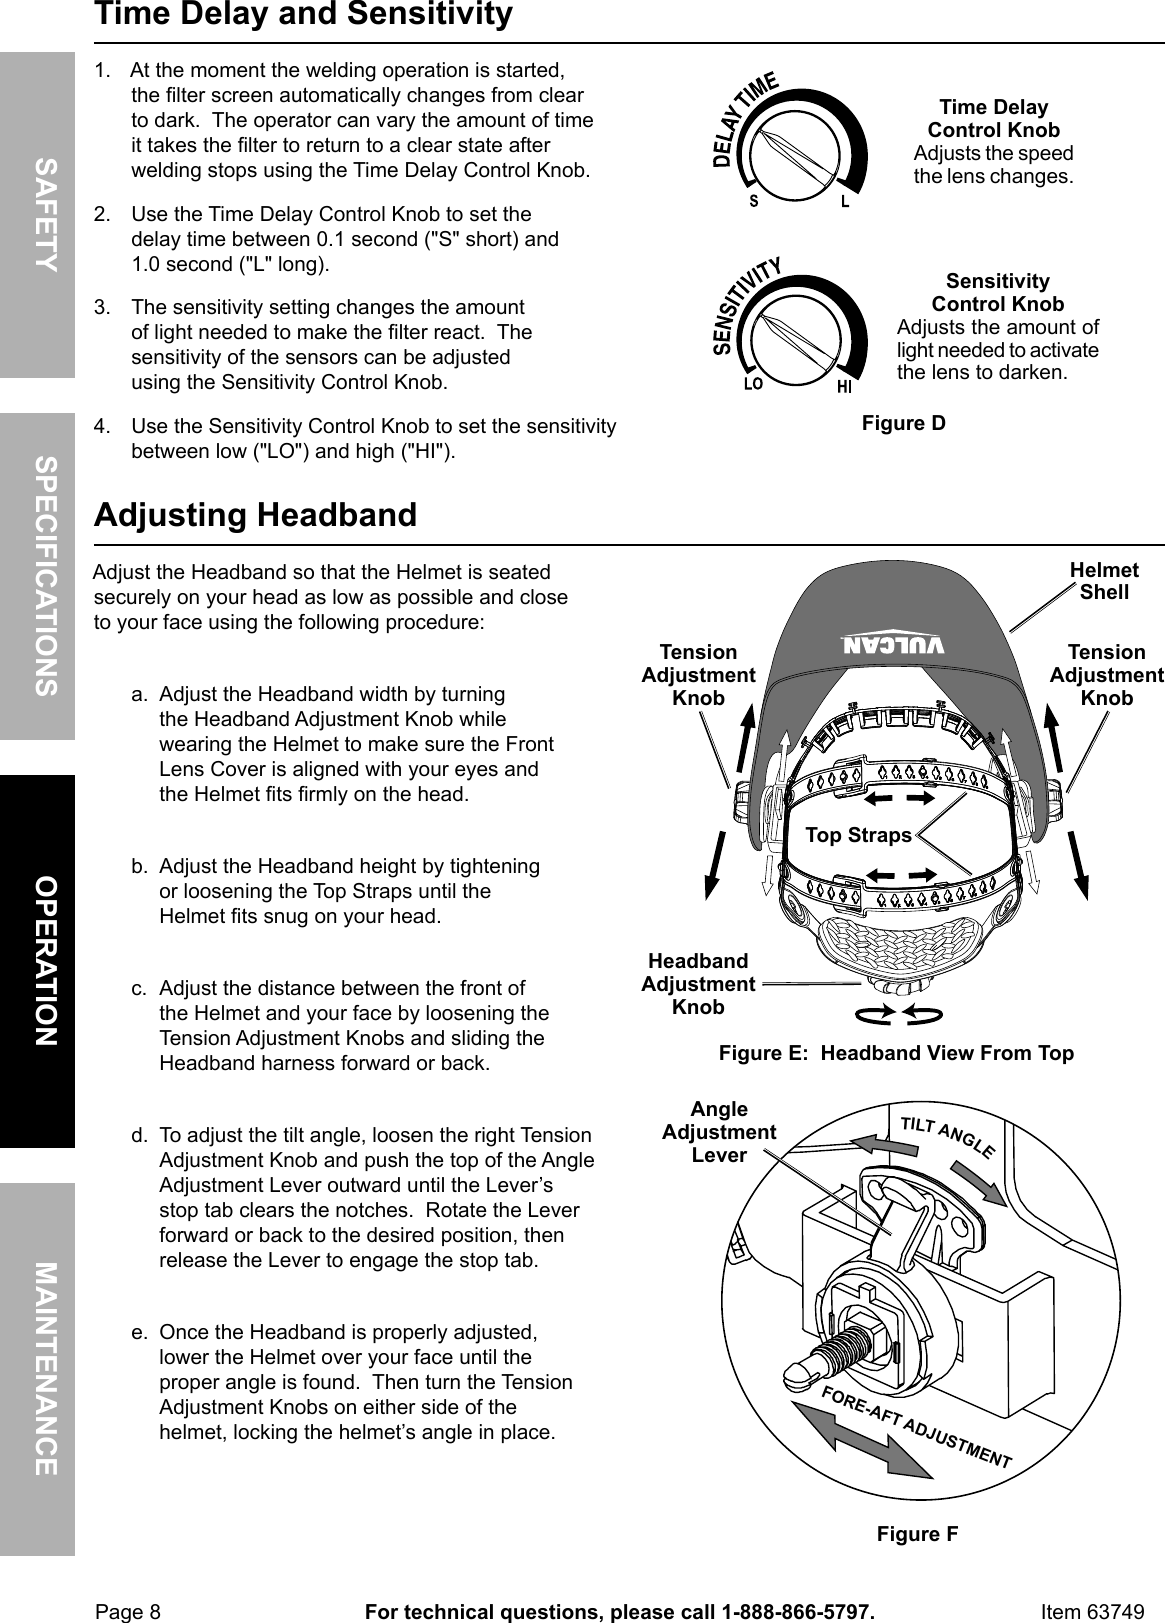 Page 8 of 12 - Manual For The 63749 Arc Safe™ Auto Darkening Welding Helmet